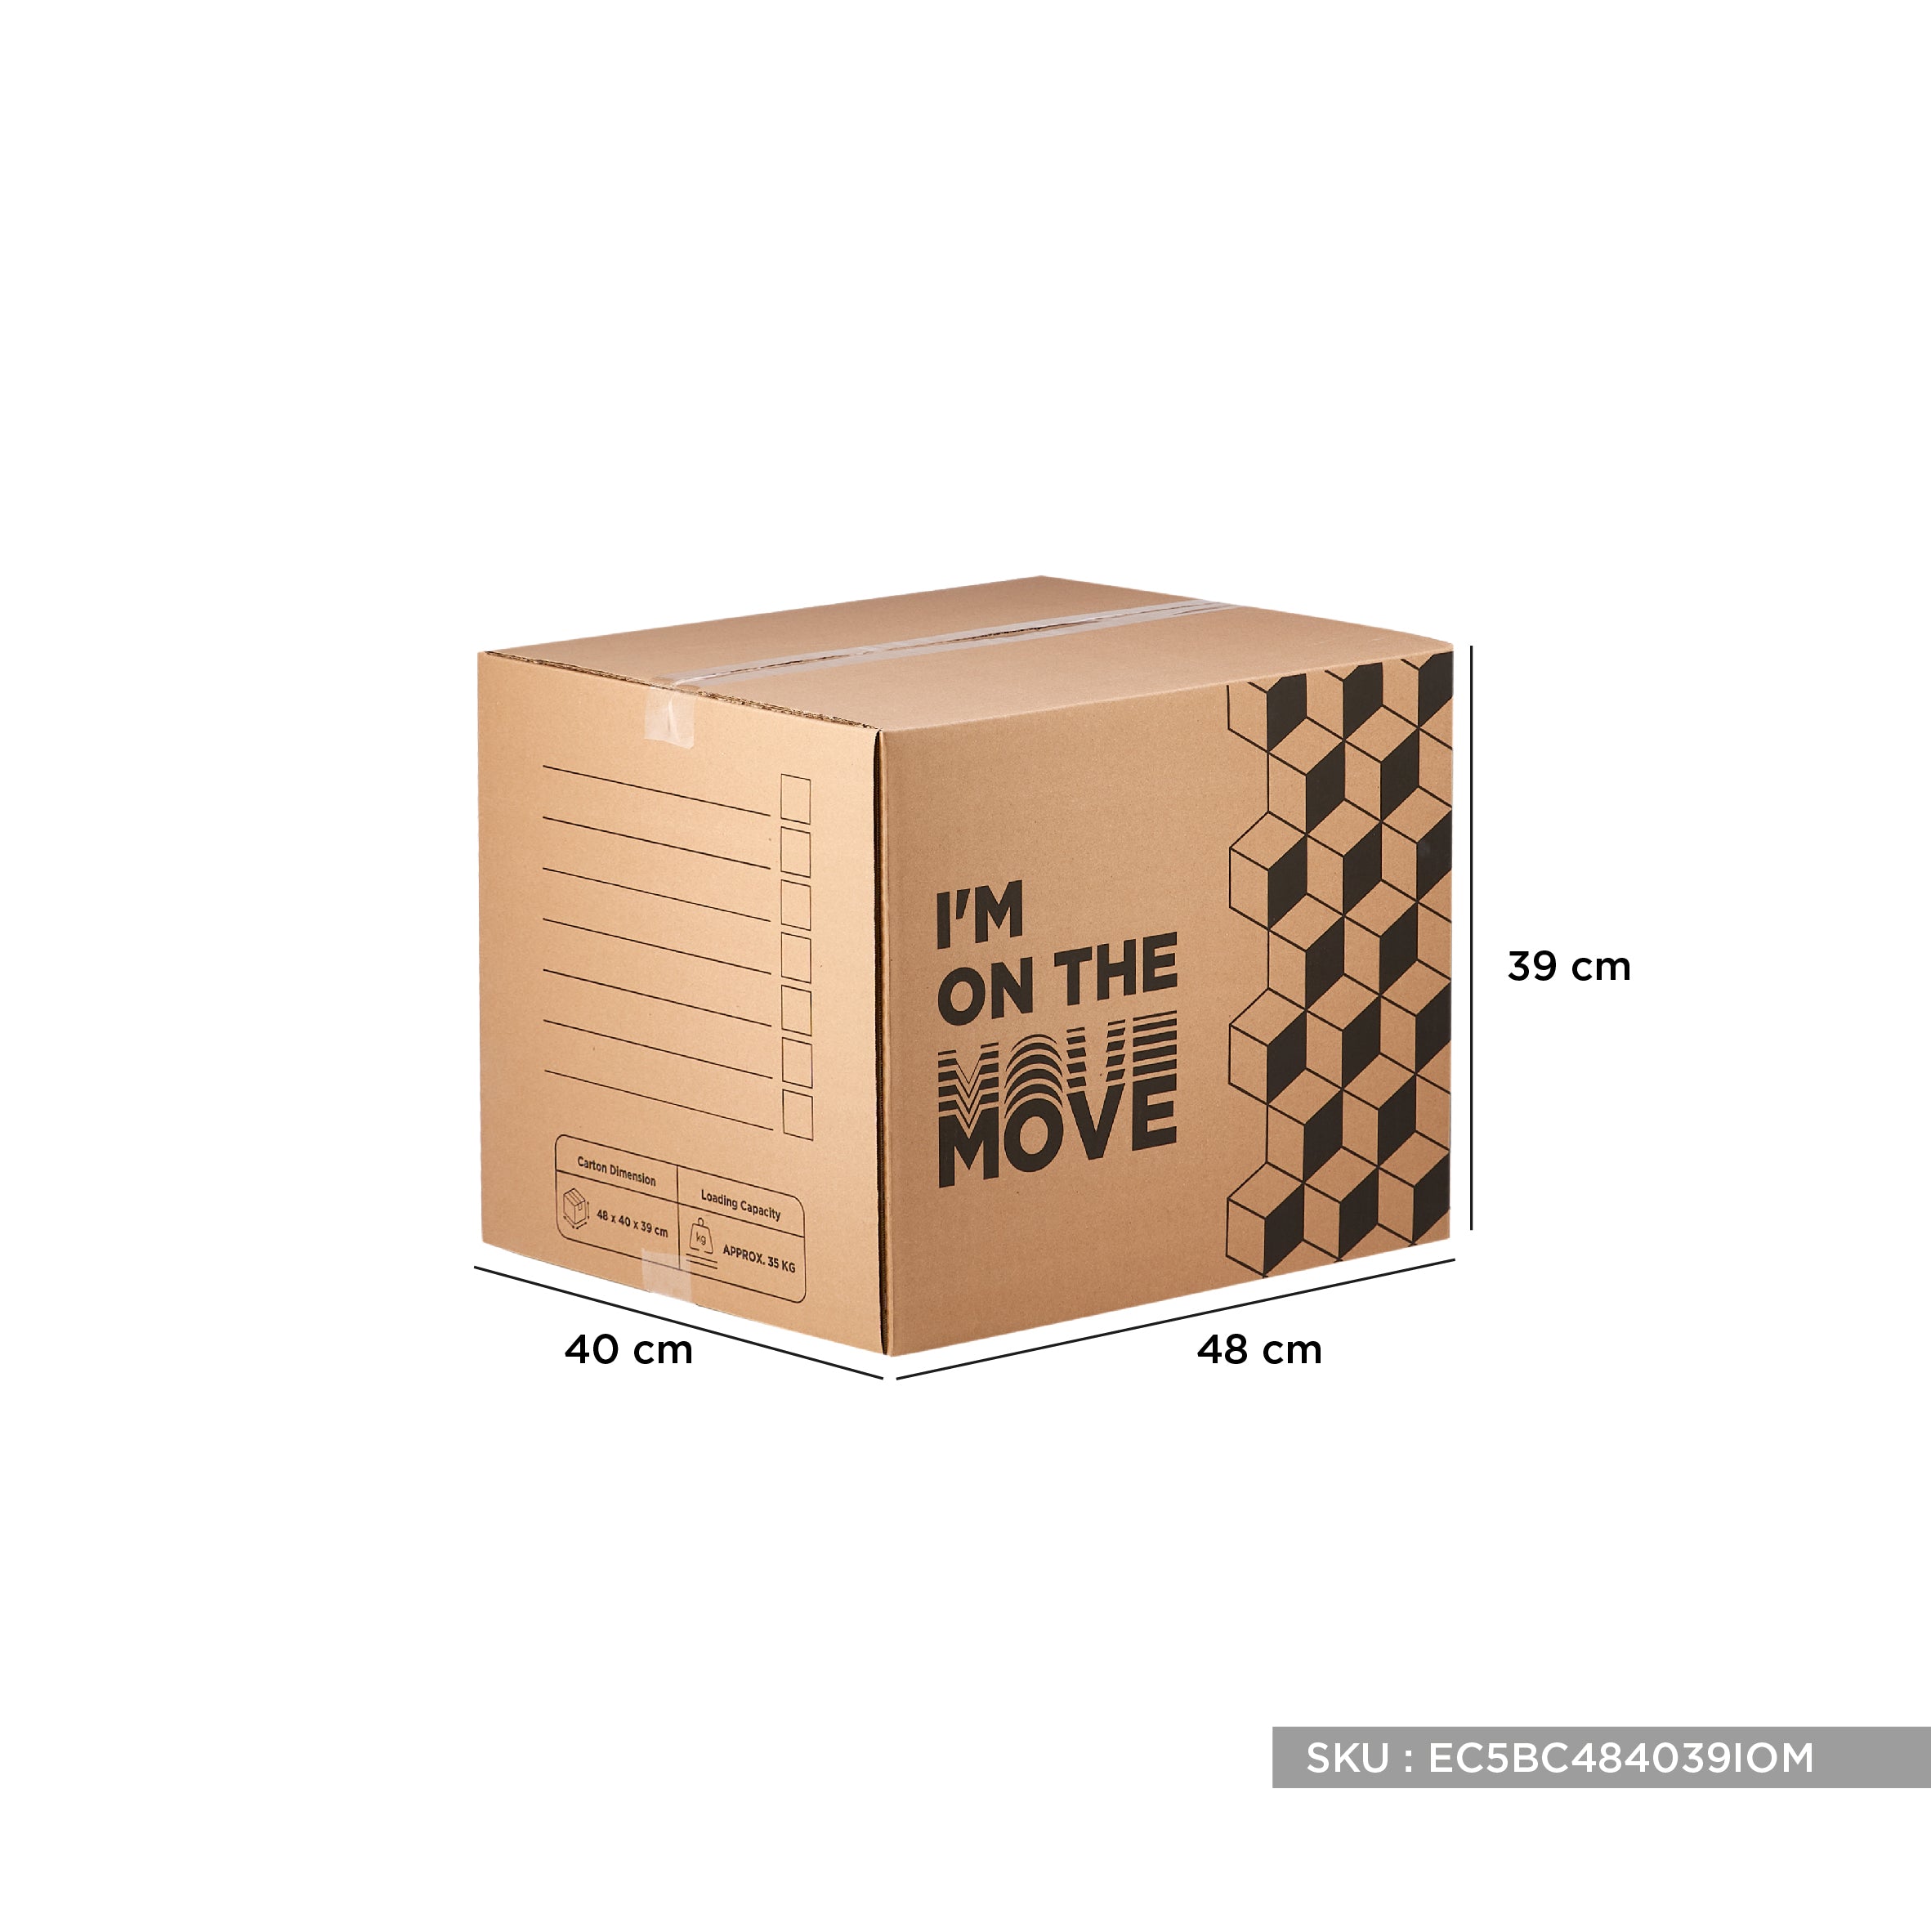 Corrugated Carboard Moving Box - hotpackwebstore.com